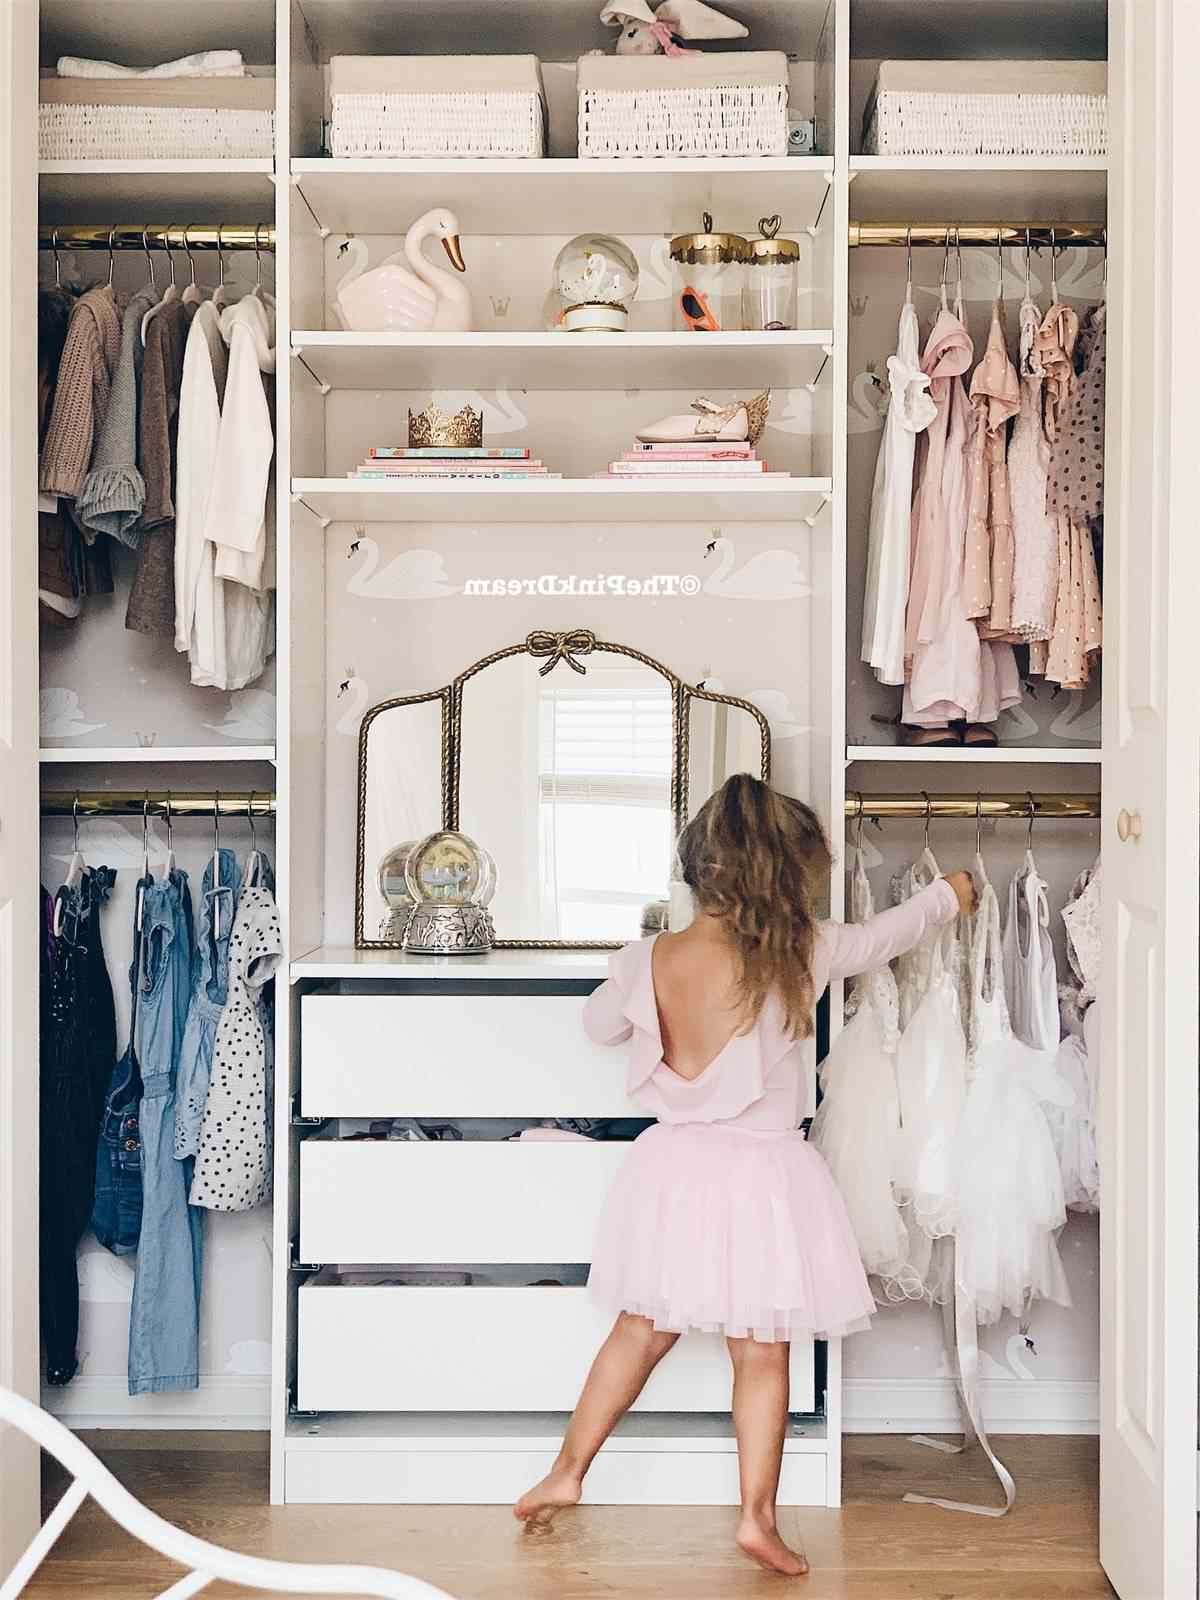 8 Tips For Designing Better Kids' Rooms With Double Rail Childrens Wardrobes (Gallery 10 of 20)